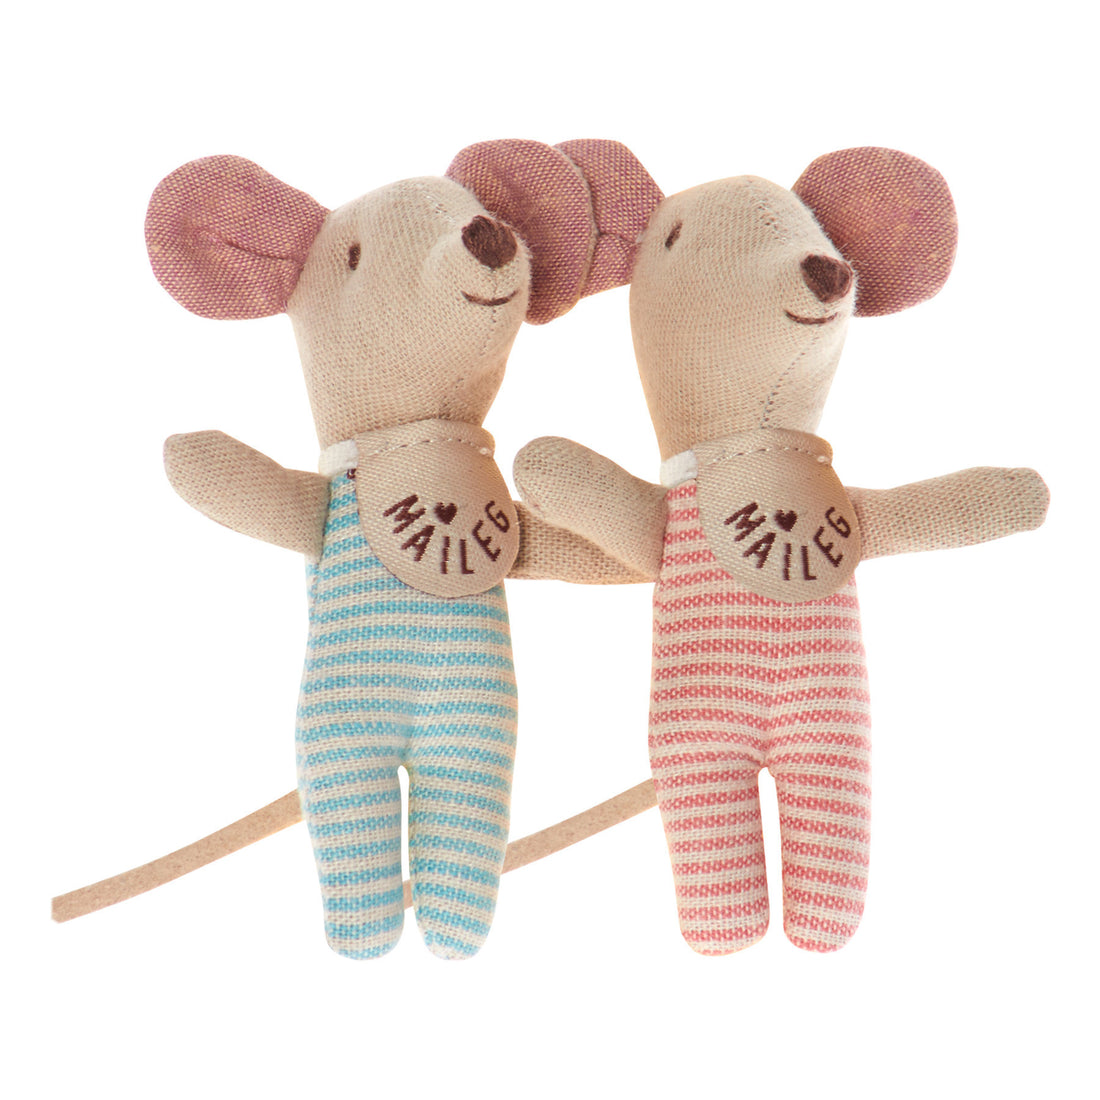 maileg-baby-twins-mouse-in-box-02